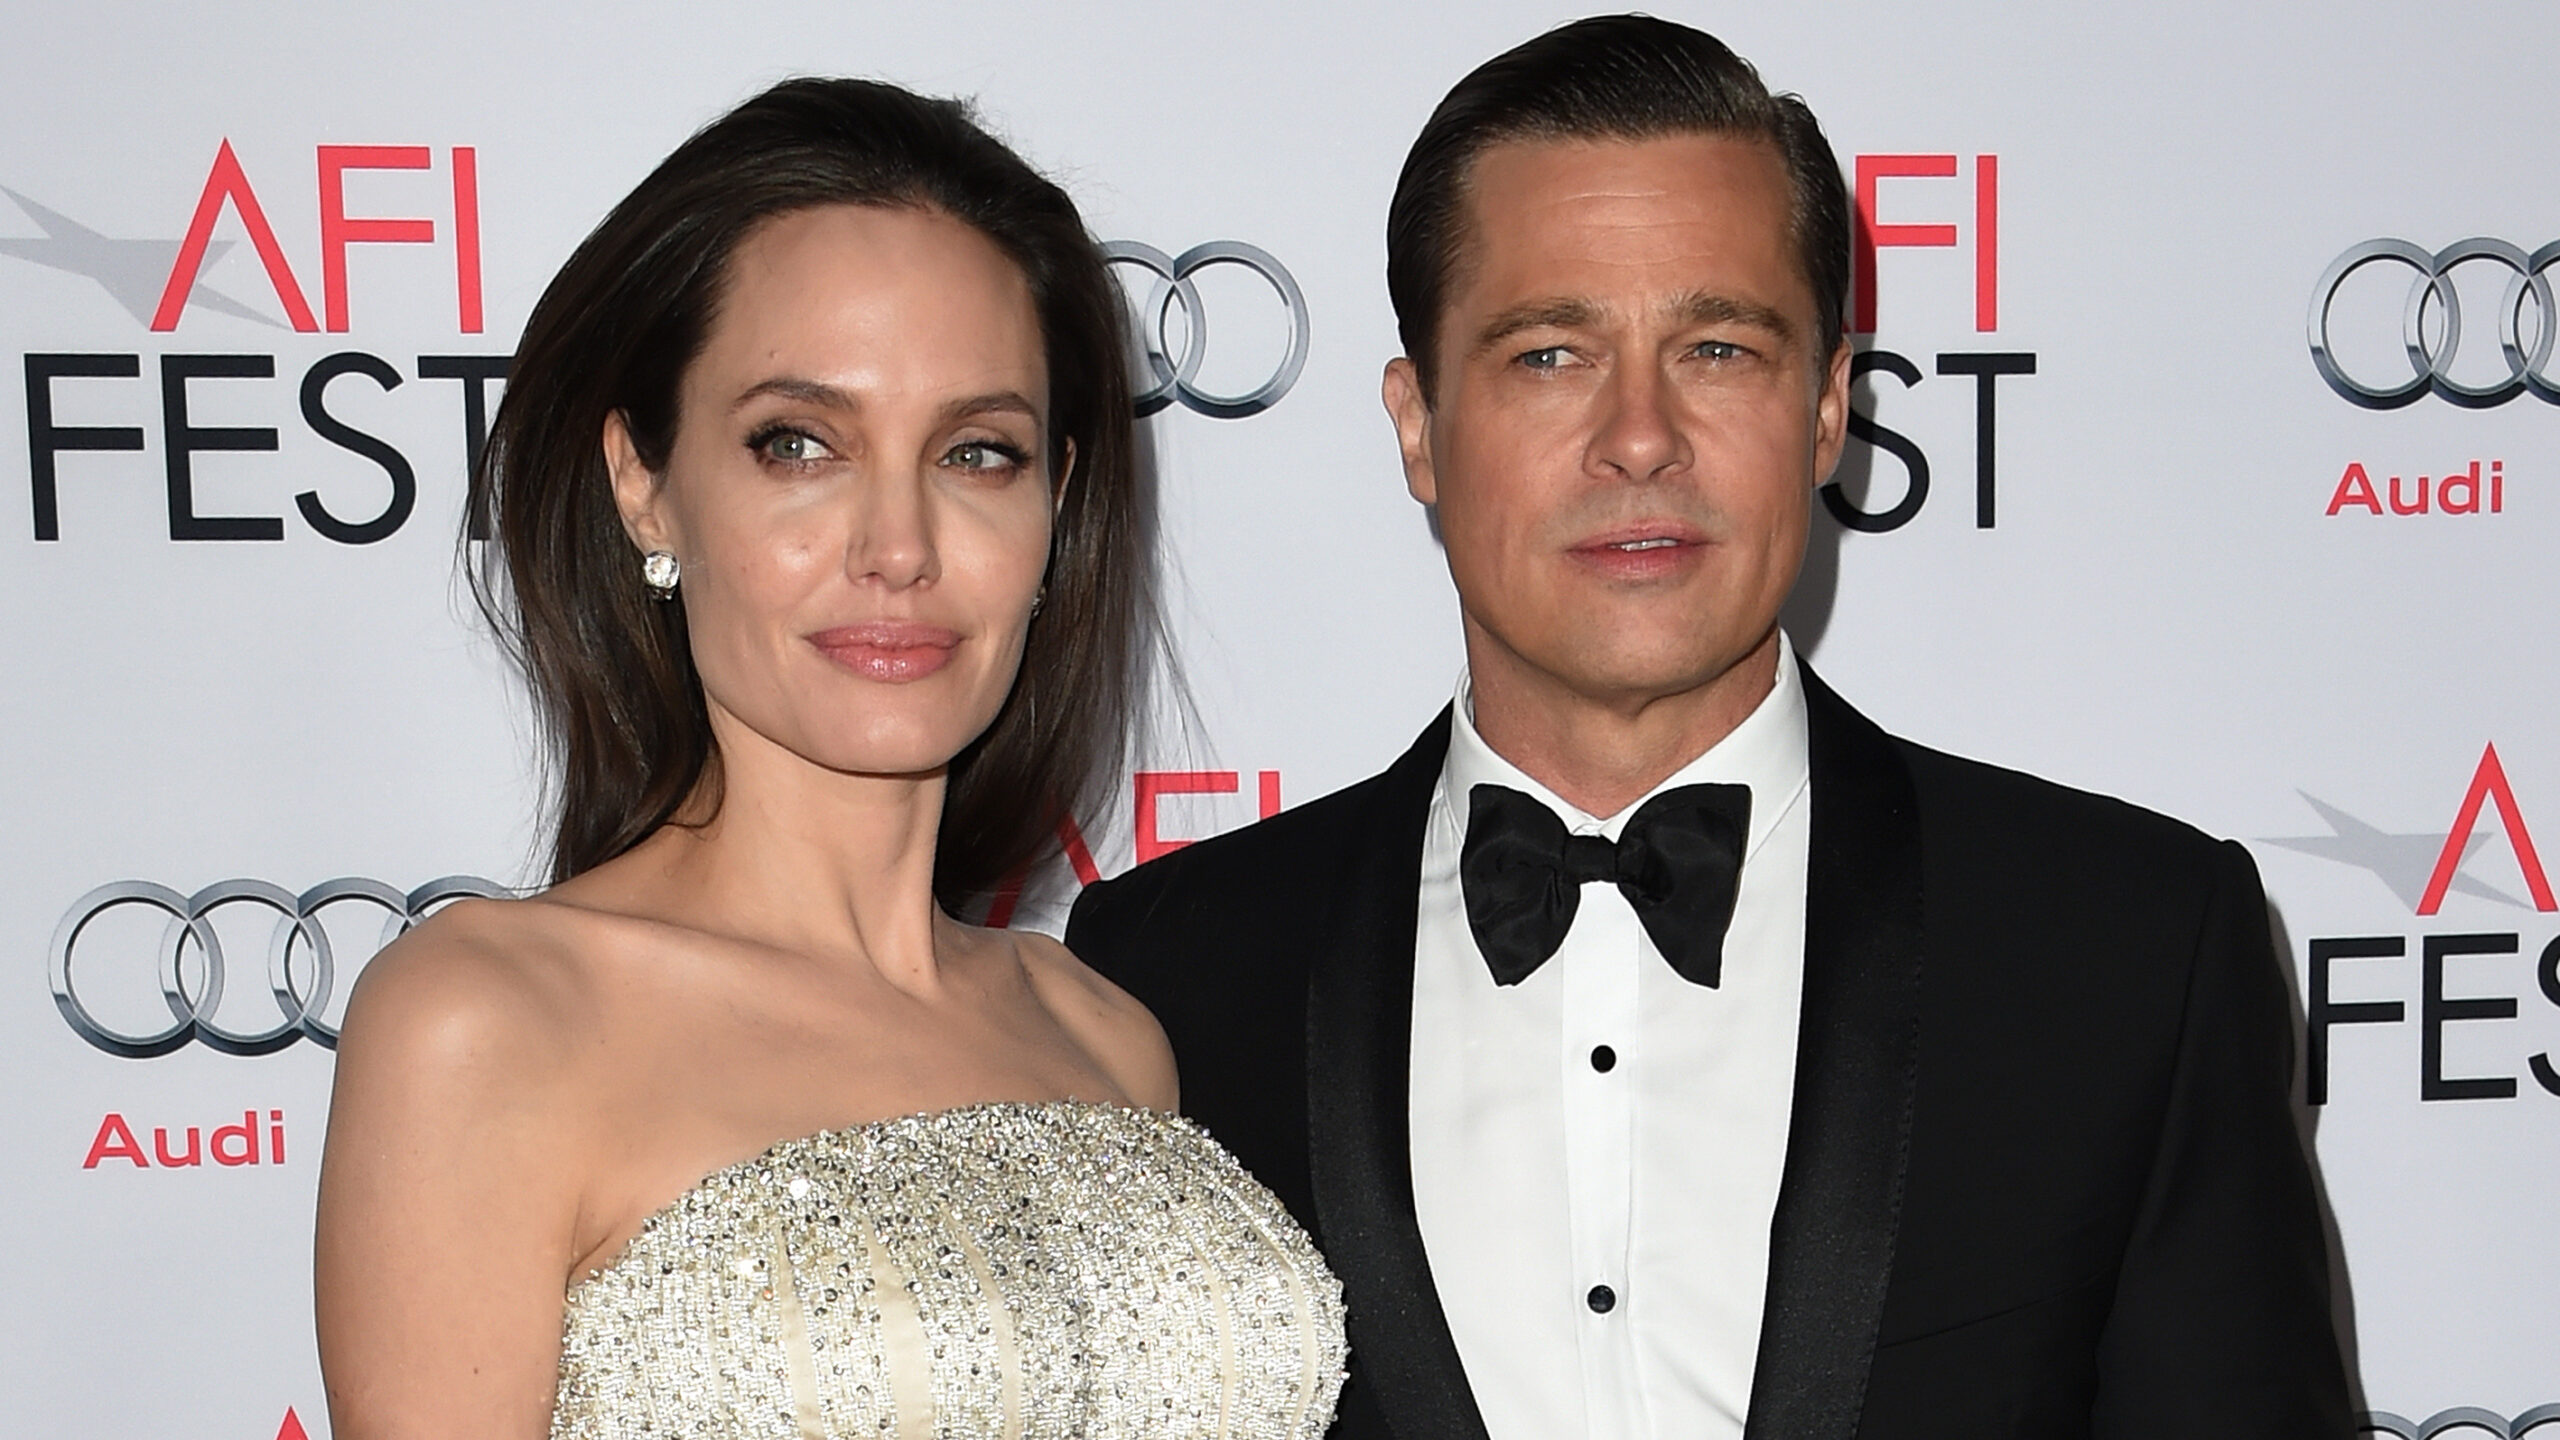 Angelina Jolie thought working with Brad Pitt on ‘By the Sea’ would save their marriage